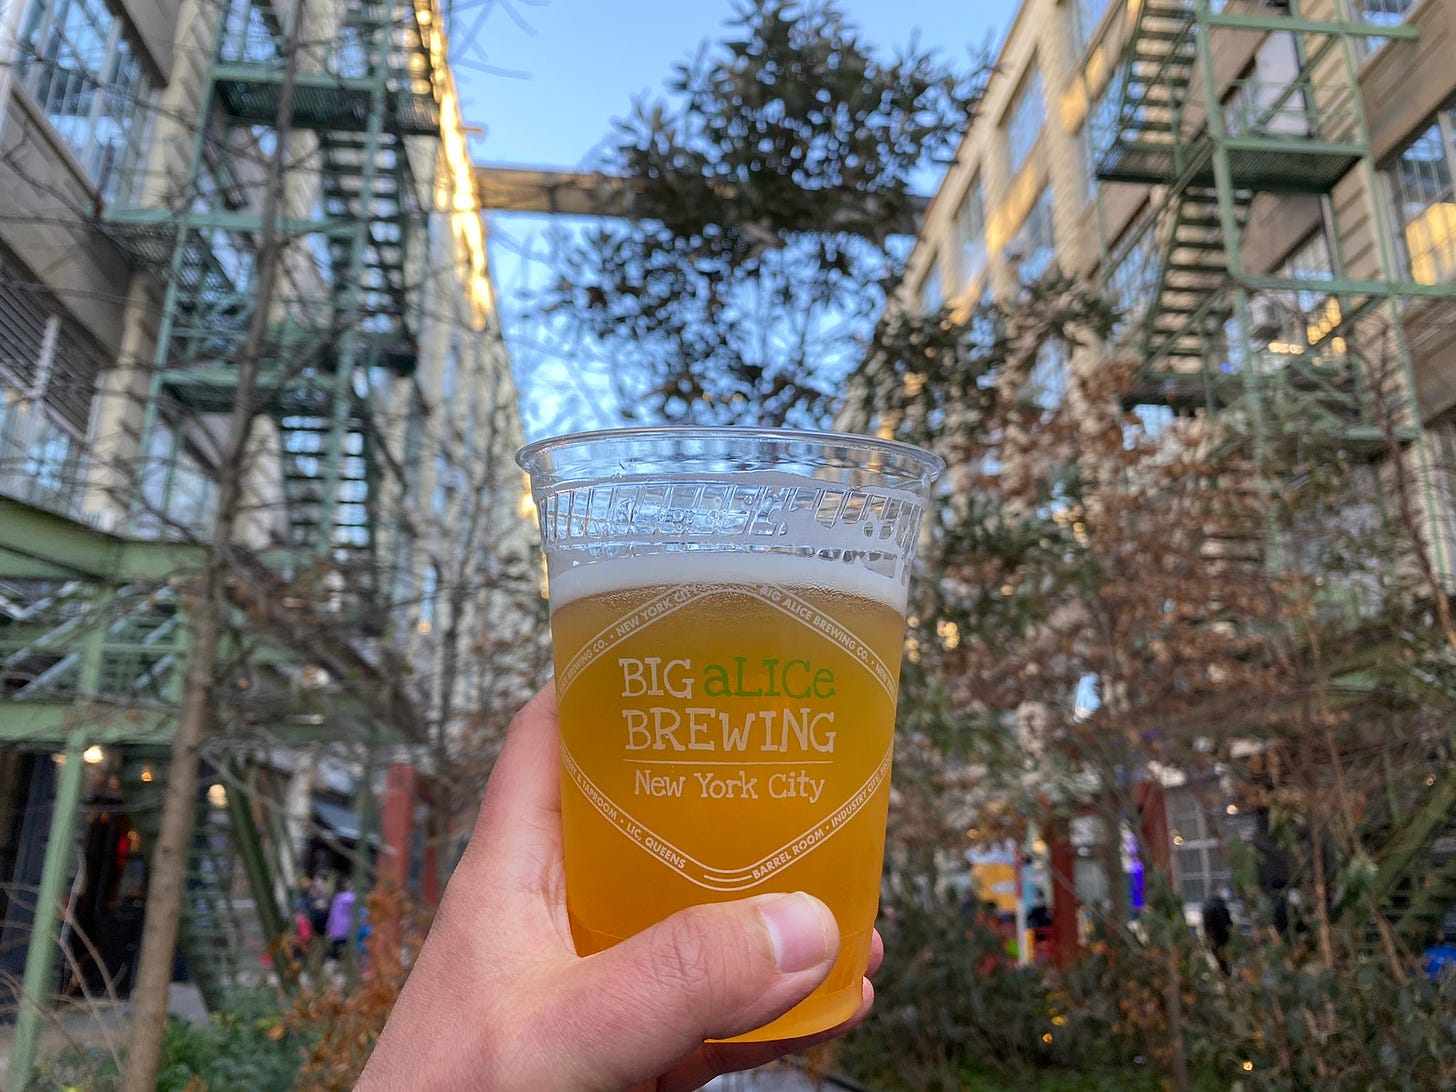 A cup of beer in front of an industrial courtyard with trees